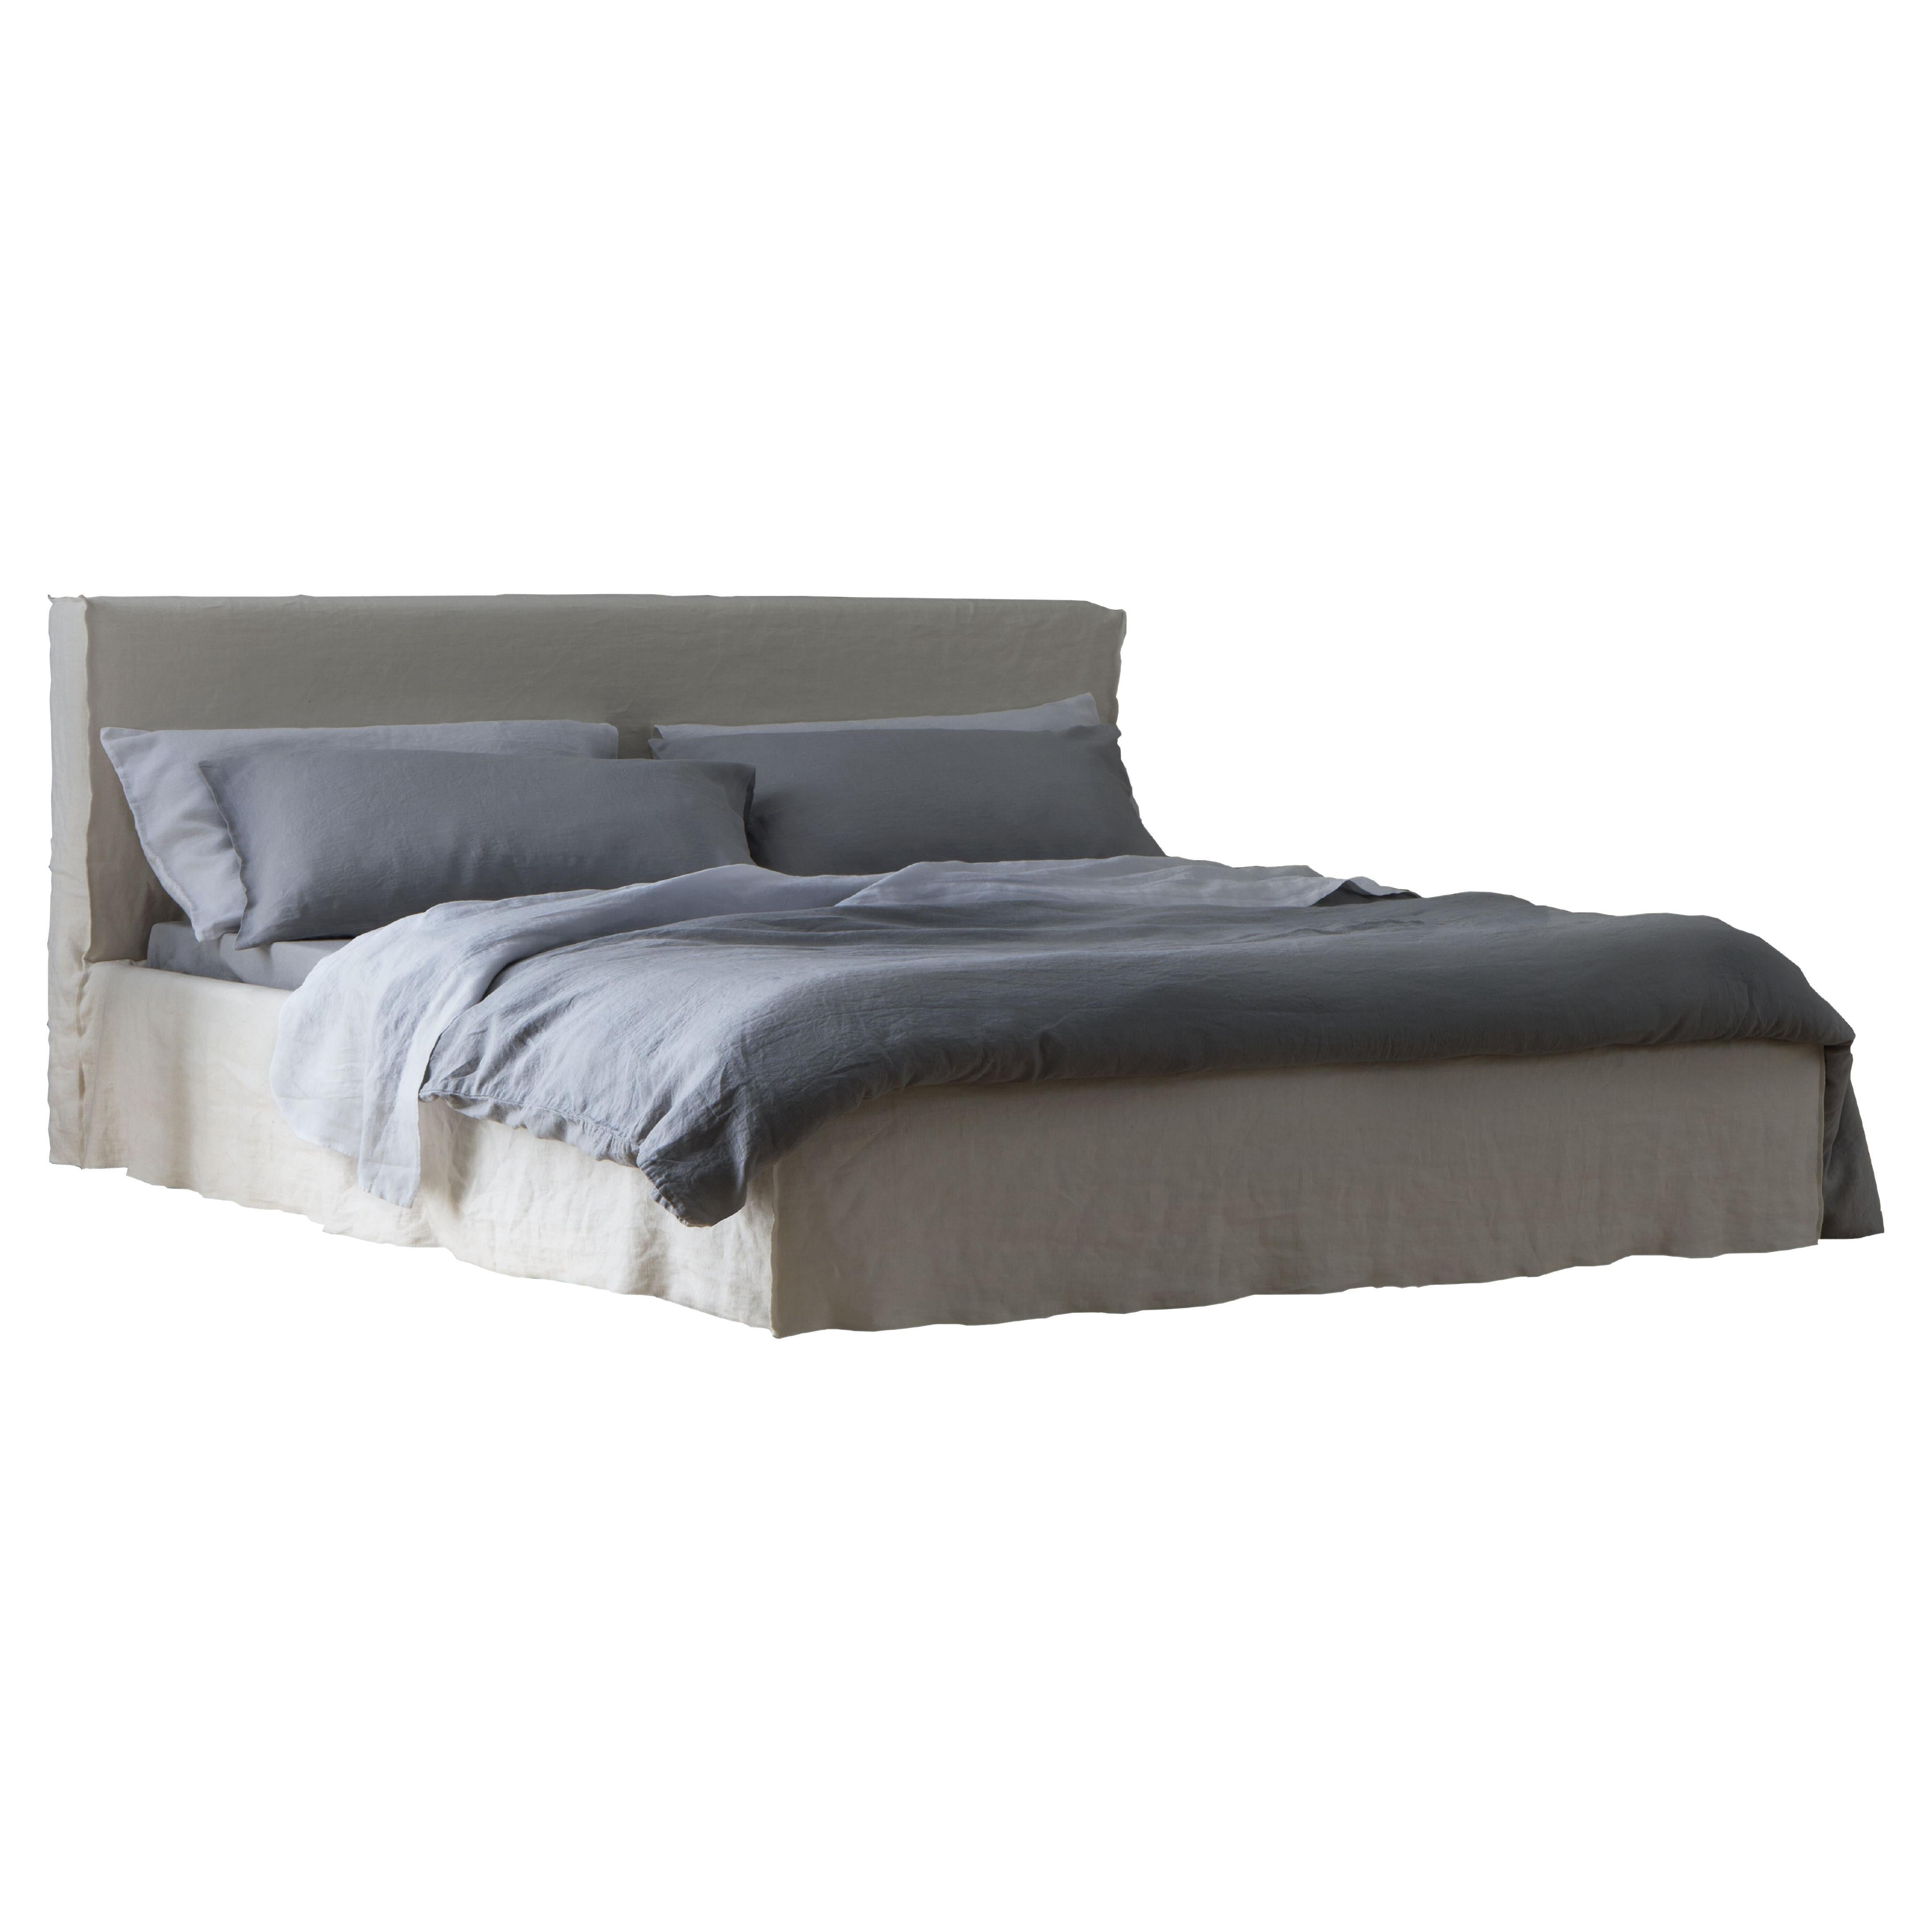 Gervasoni Brick 80 E Knock Down Bed in Butter Upholstery by Paola Navone